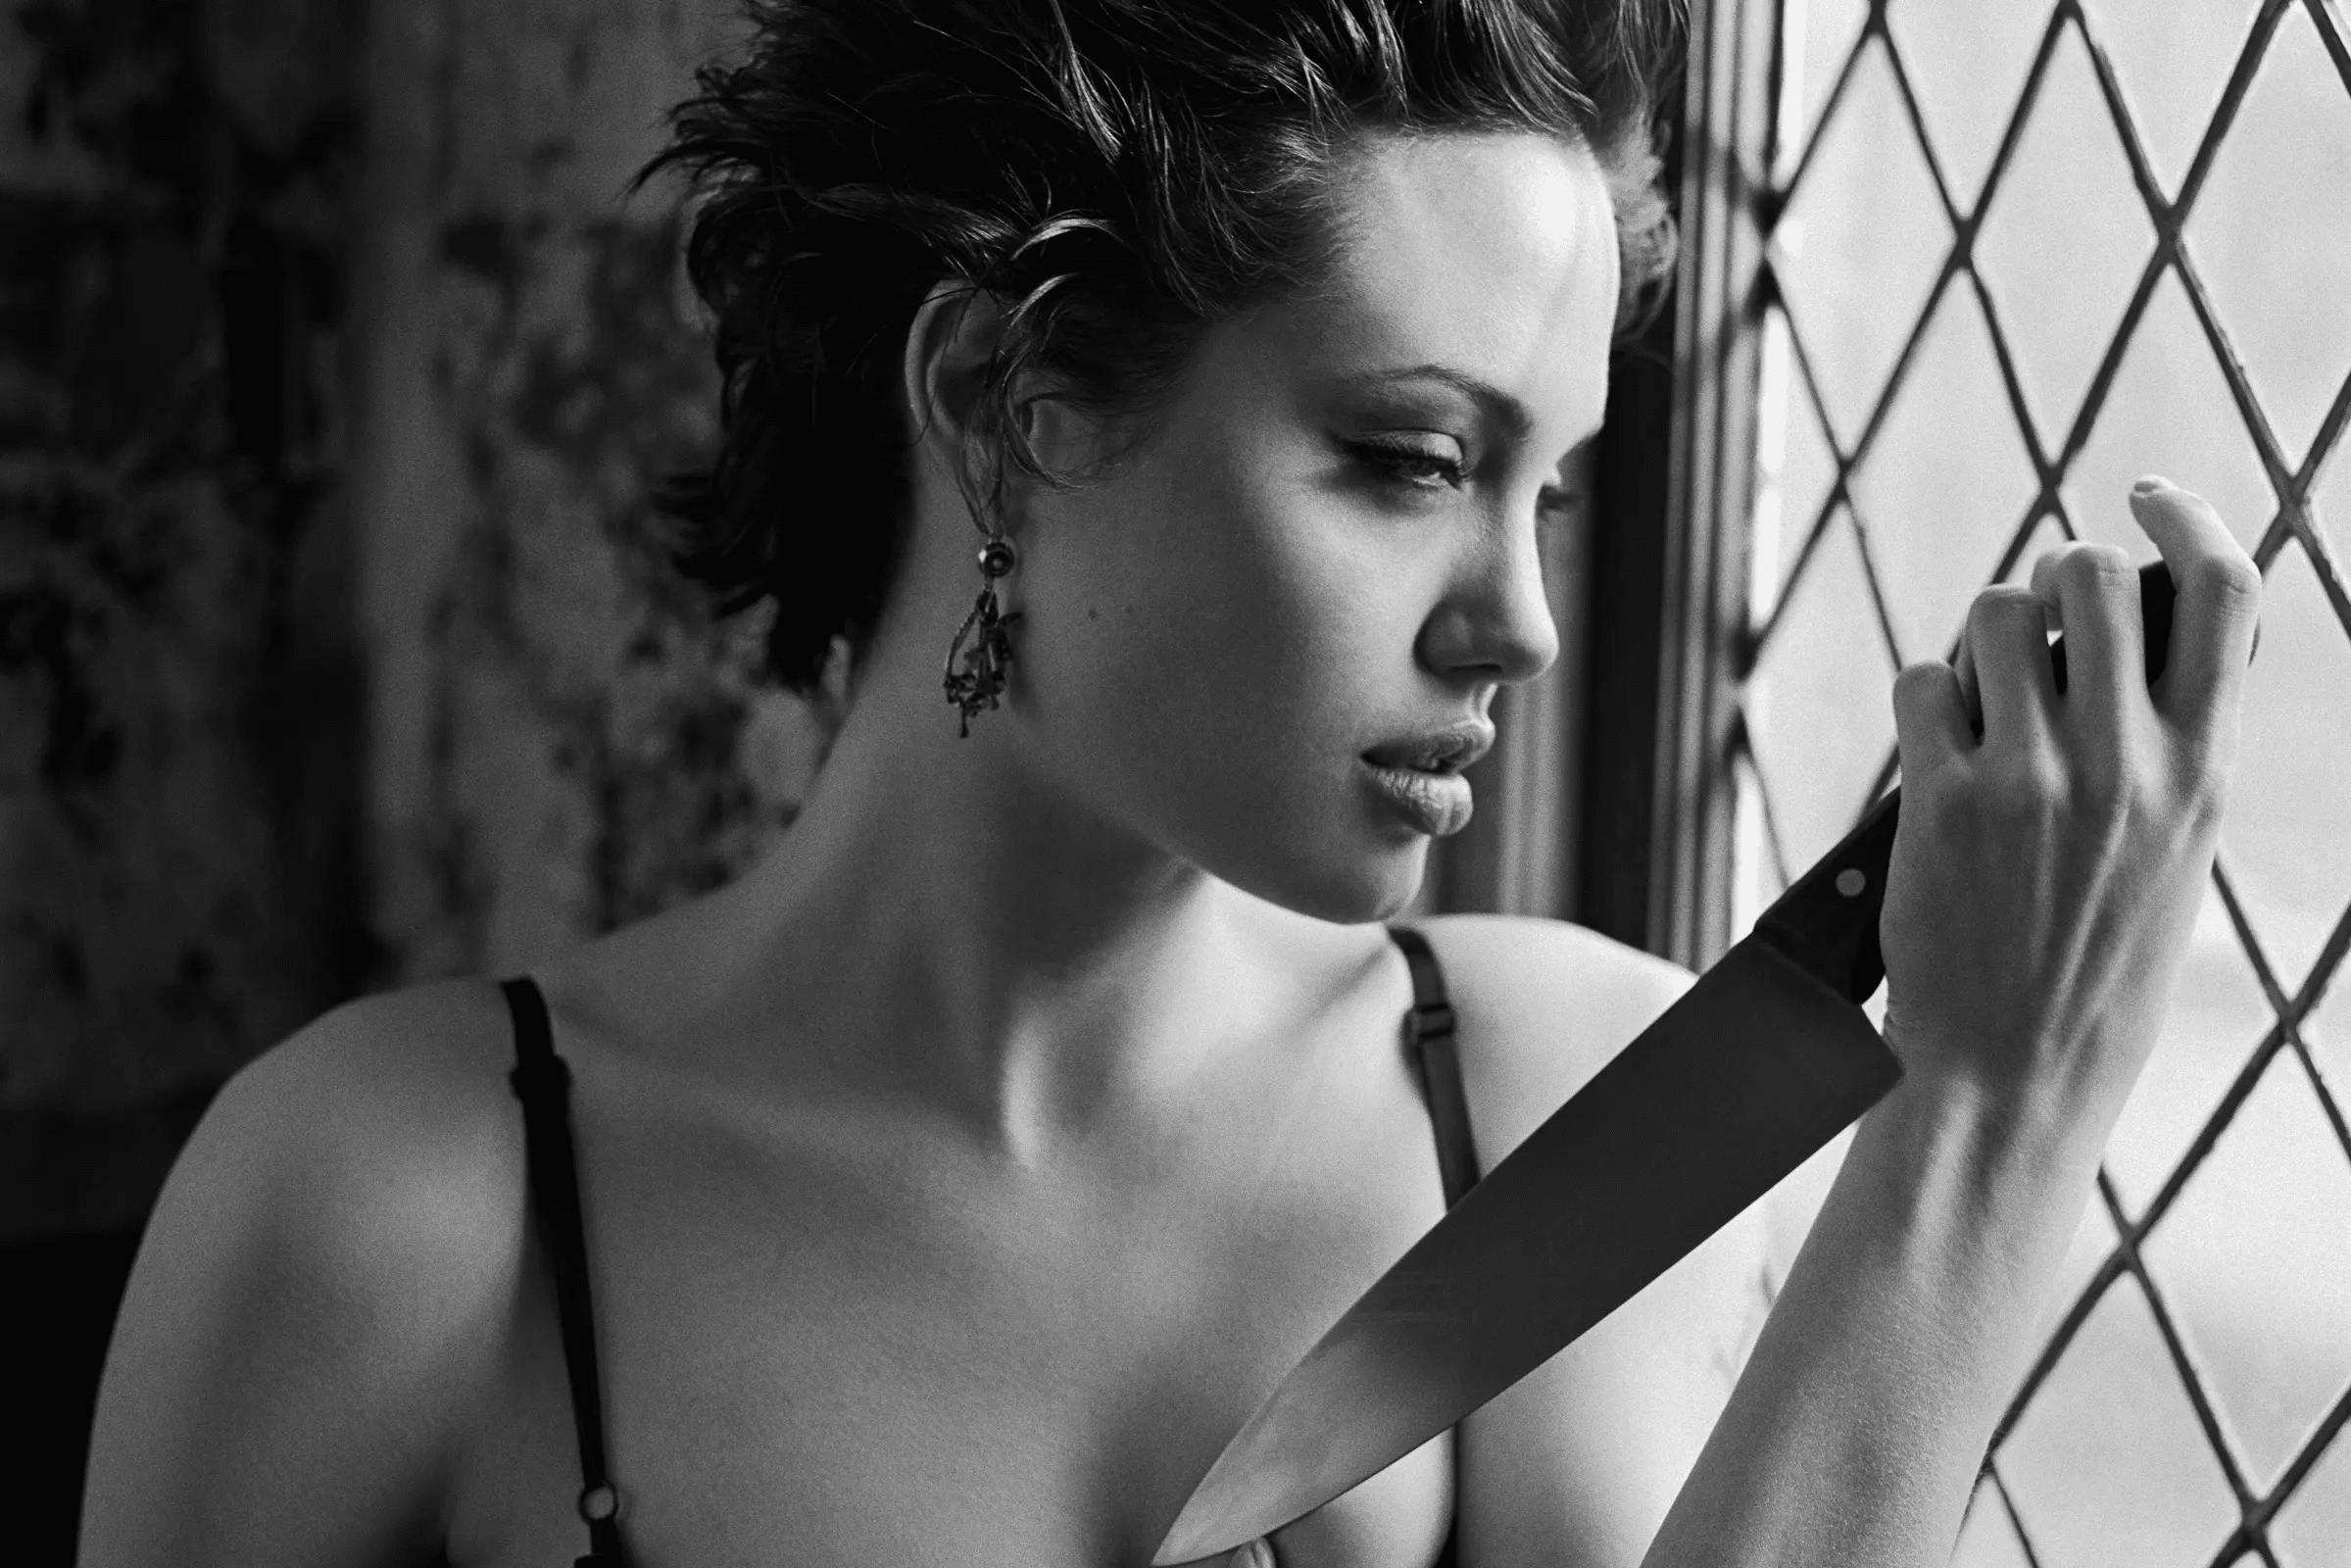 Actress Angelina Jolie has a collection of knives